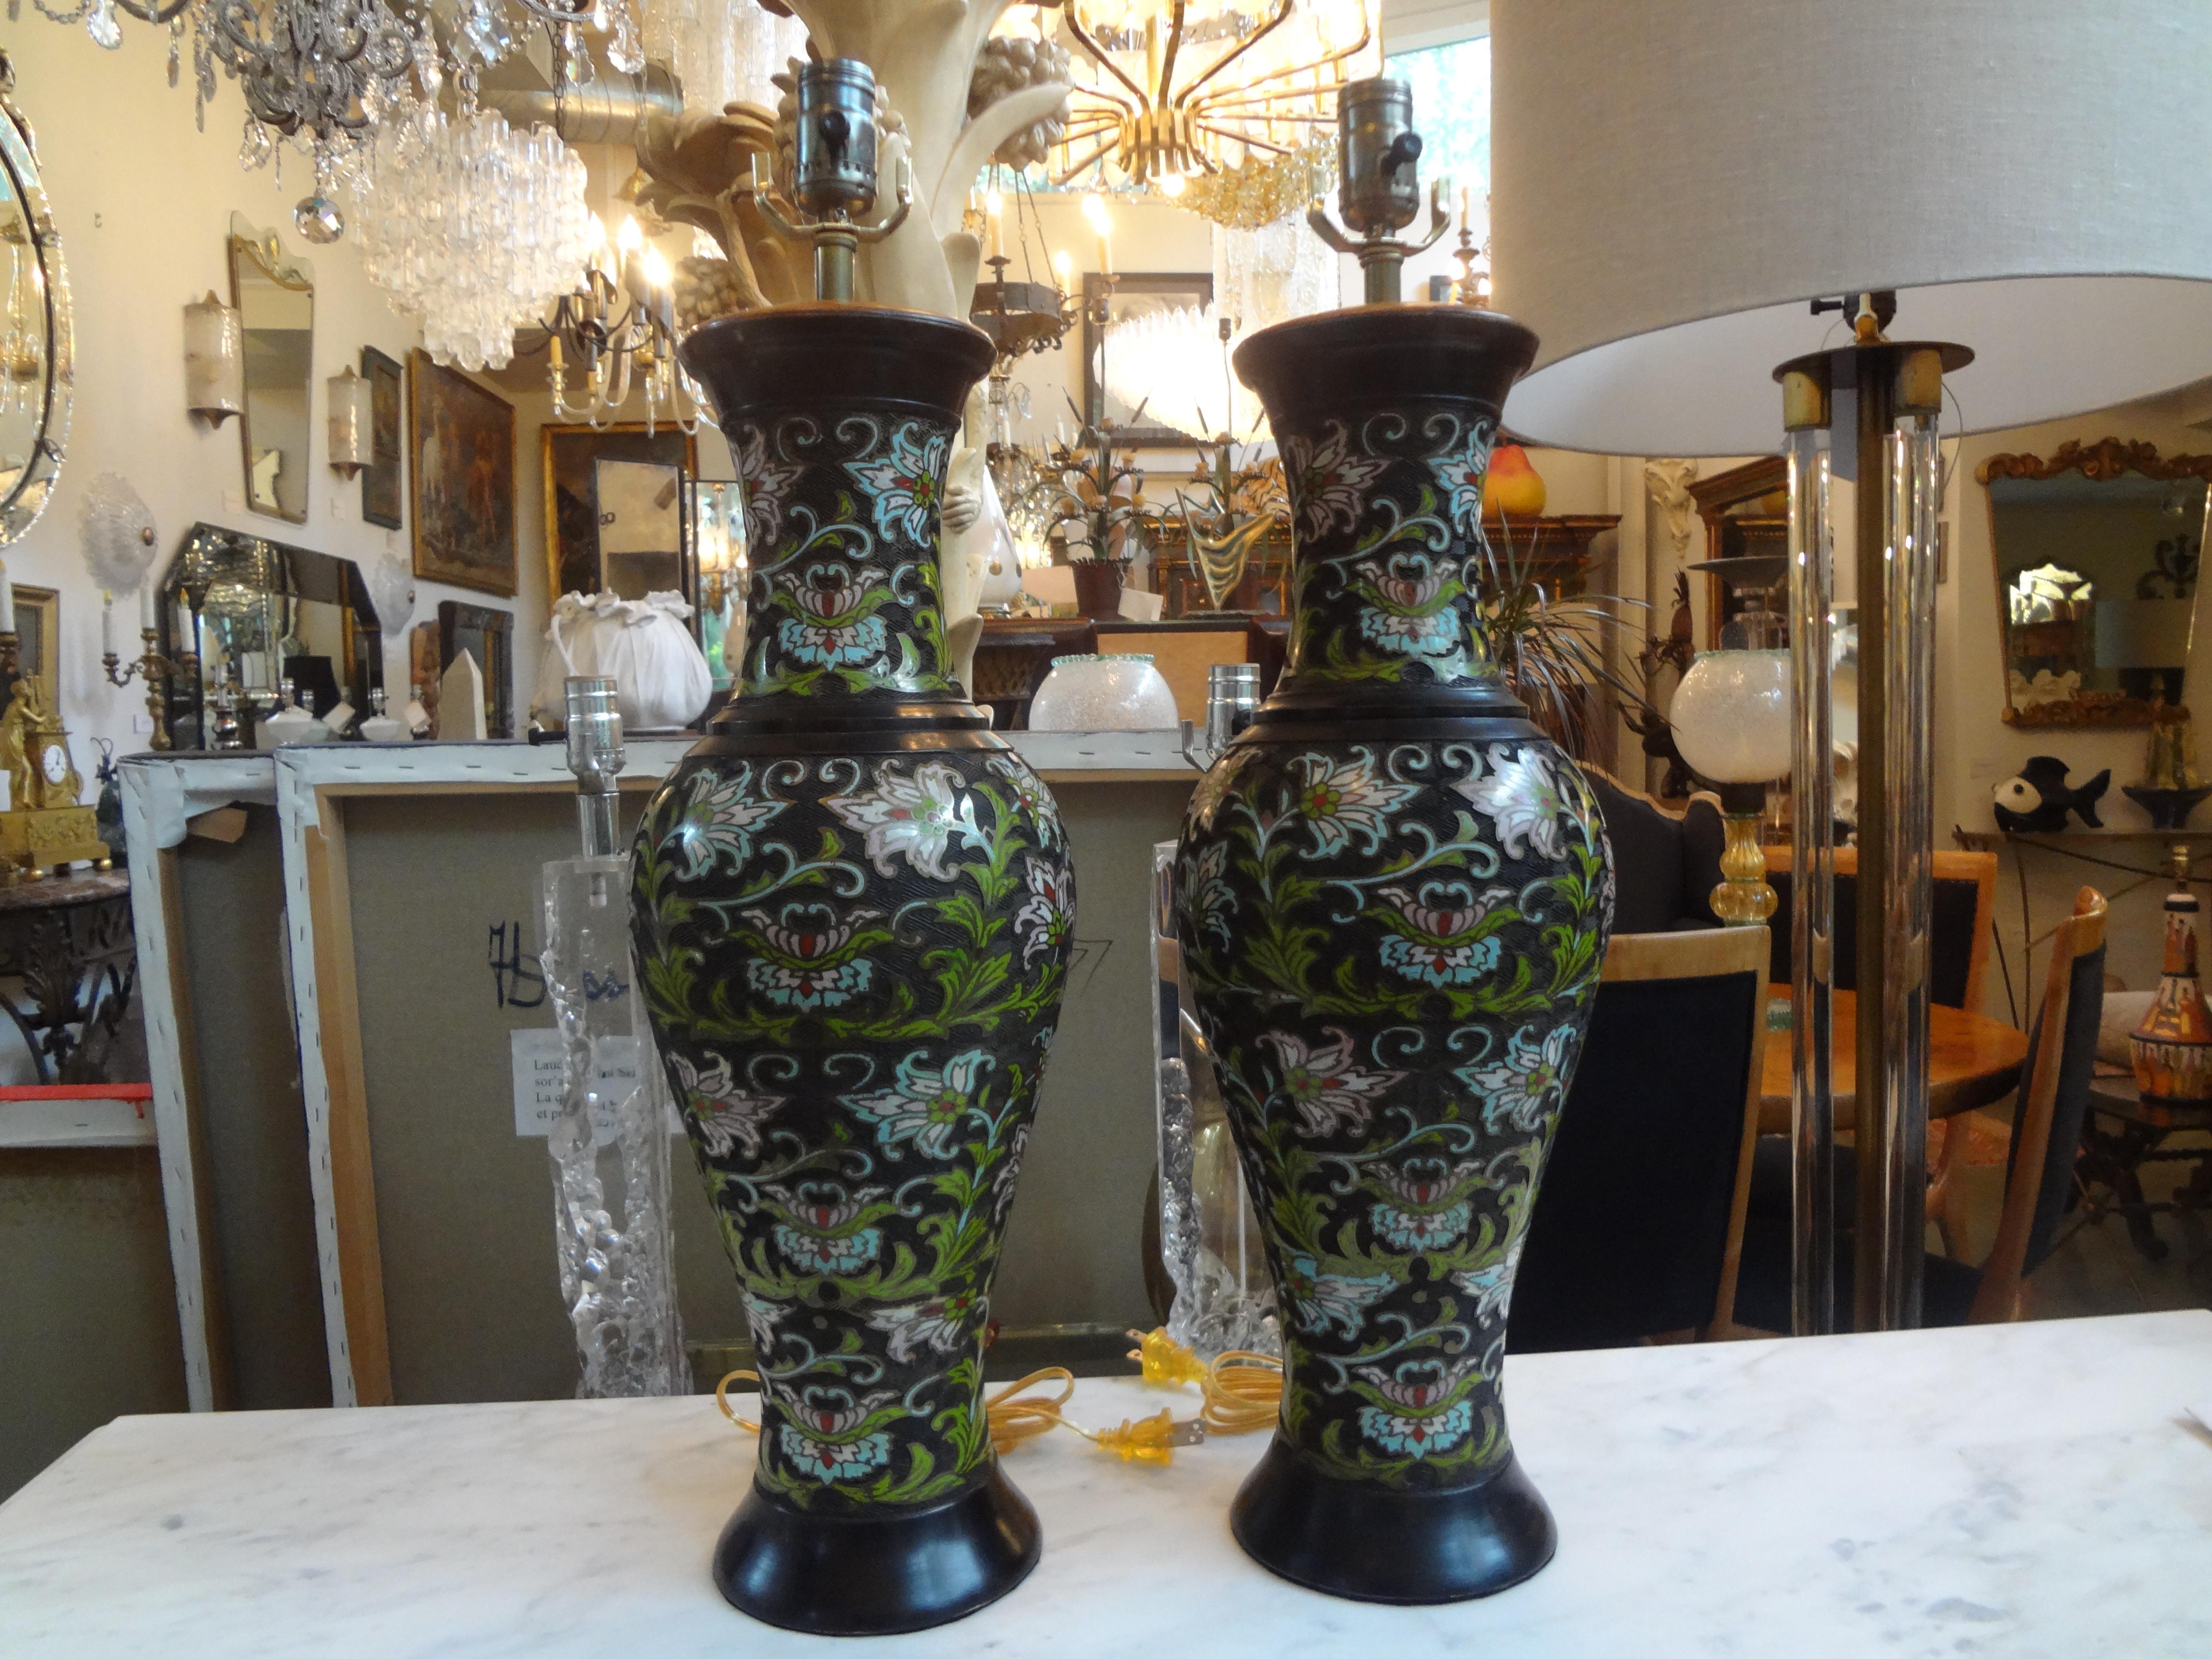 Pair of antique Chinese champlevé or cloisonné lamps.
Lovely pair of antique Chinese bronze champlevé or cloisonné table lamps. Offered champleve or cloisonne lamps are executed in a lovely floral pattern of beautiful shades including chartreuse,